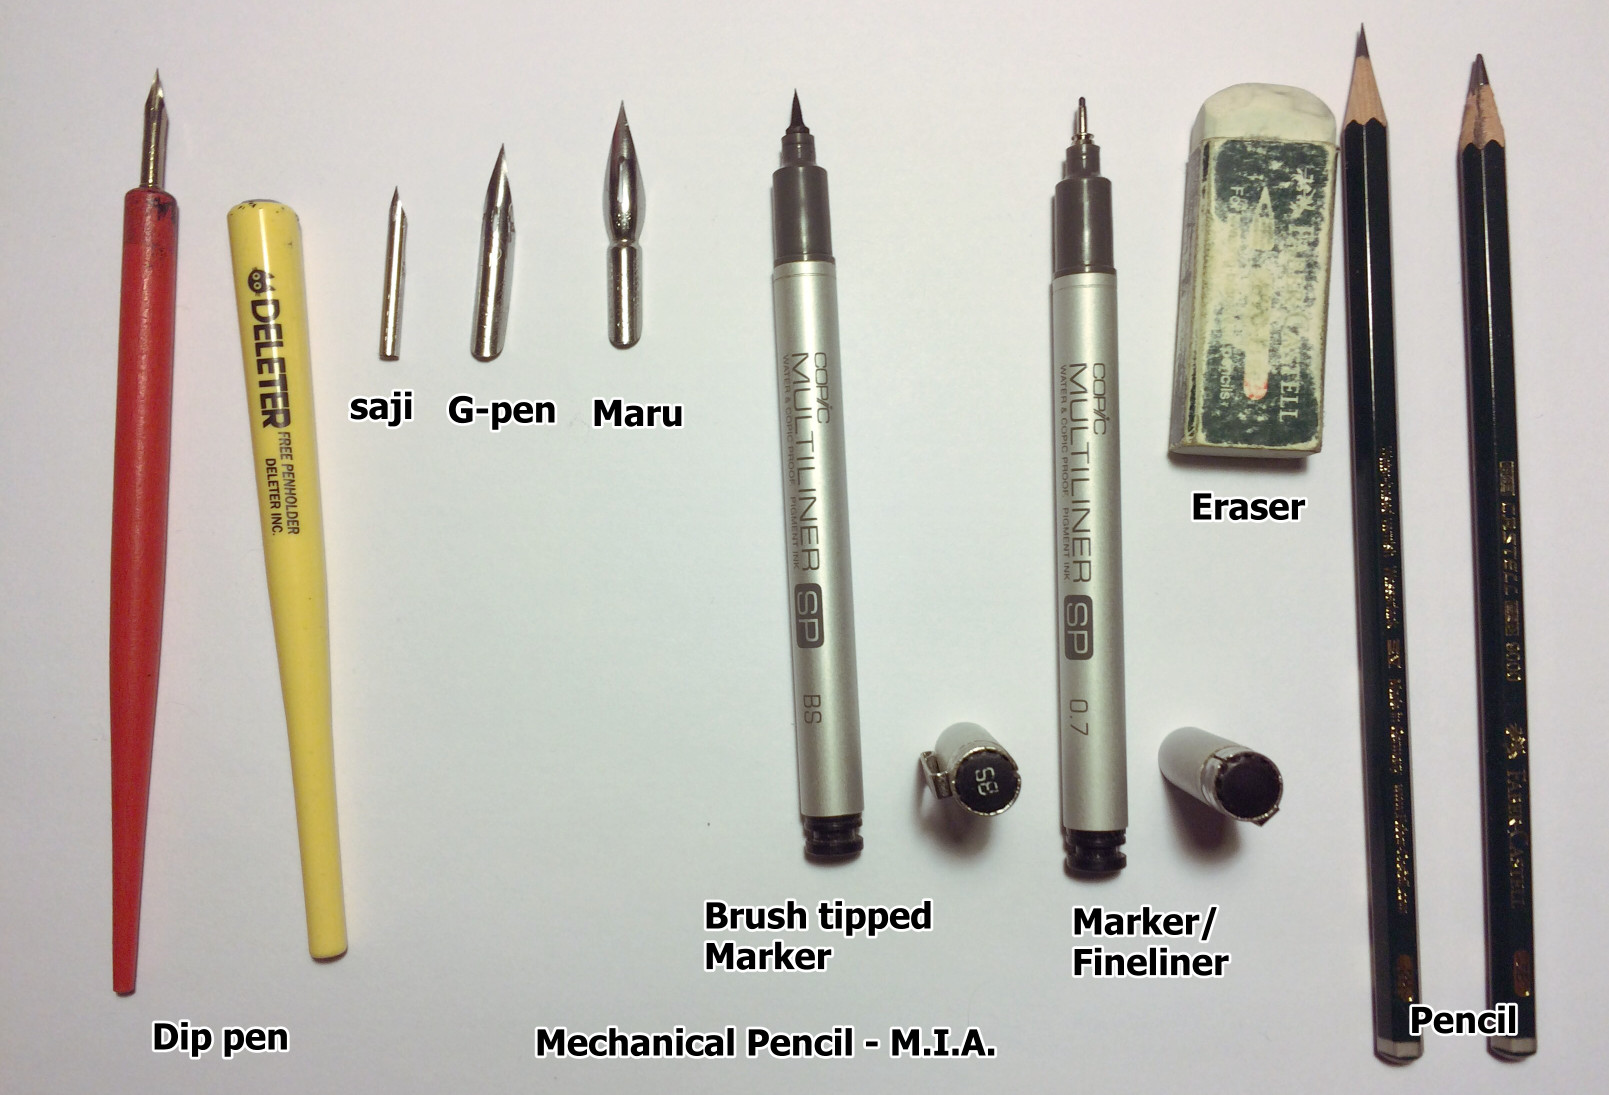 Photo showing from left to right: Two Dip-pens, brush tipped Marker, Fineliner, eraser and two pencils.